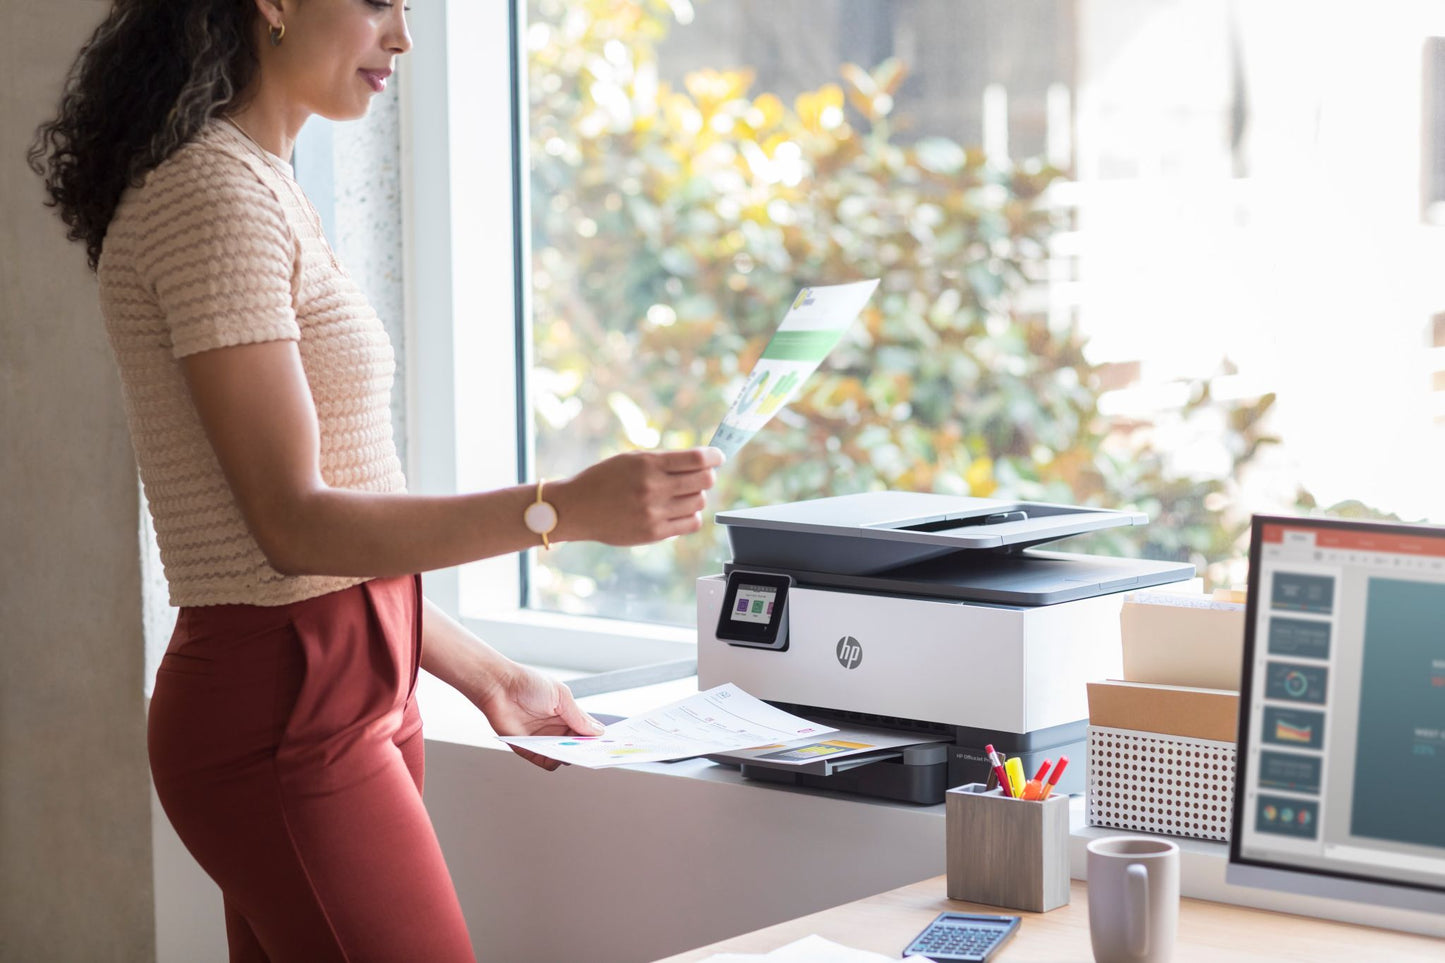 HP OfficeJet Pro 9012 All-in-one wireless printer Print,Scan,Copy from your phone, Instant Ink ready & voice activated (works with Alexa and Google Assistant)